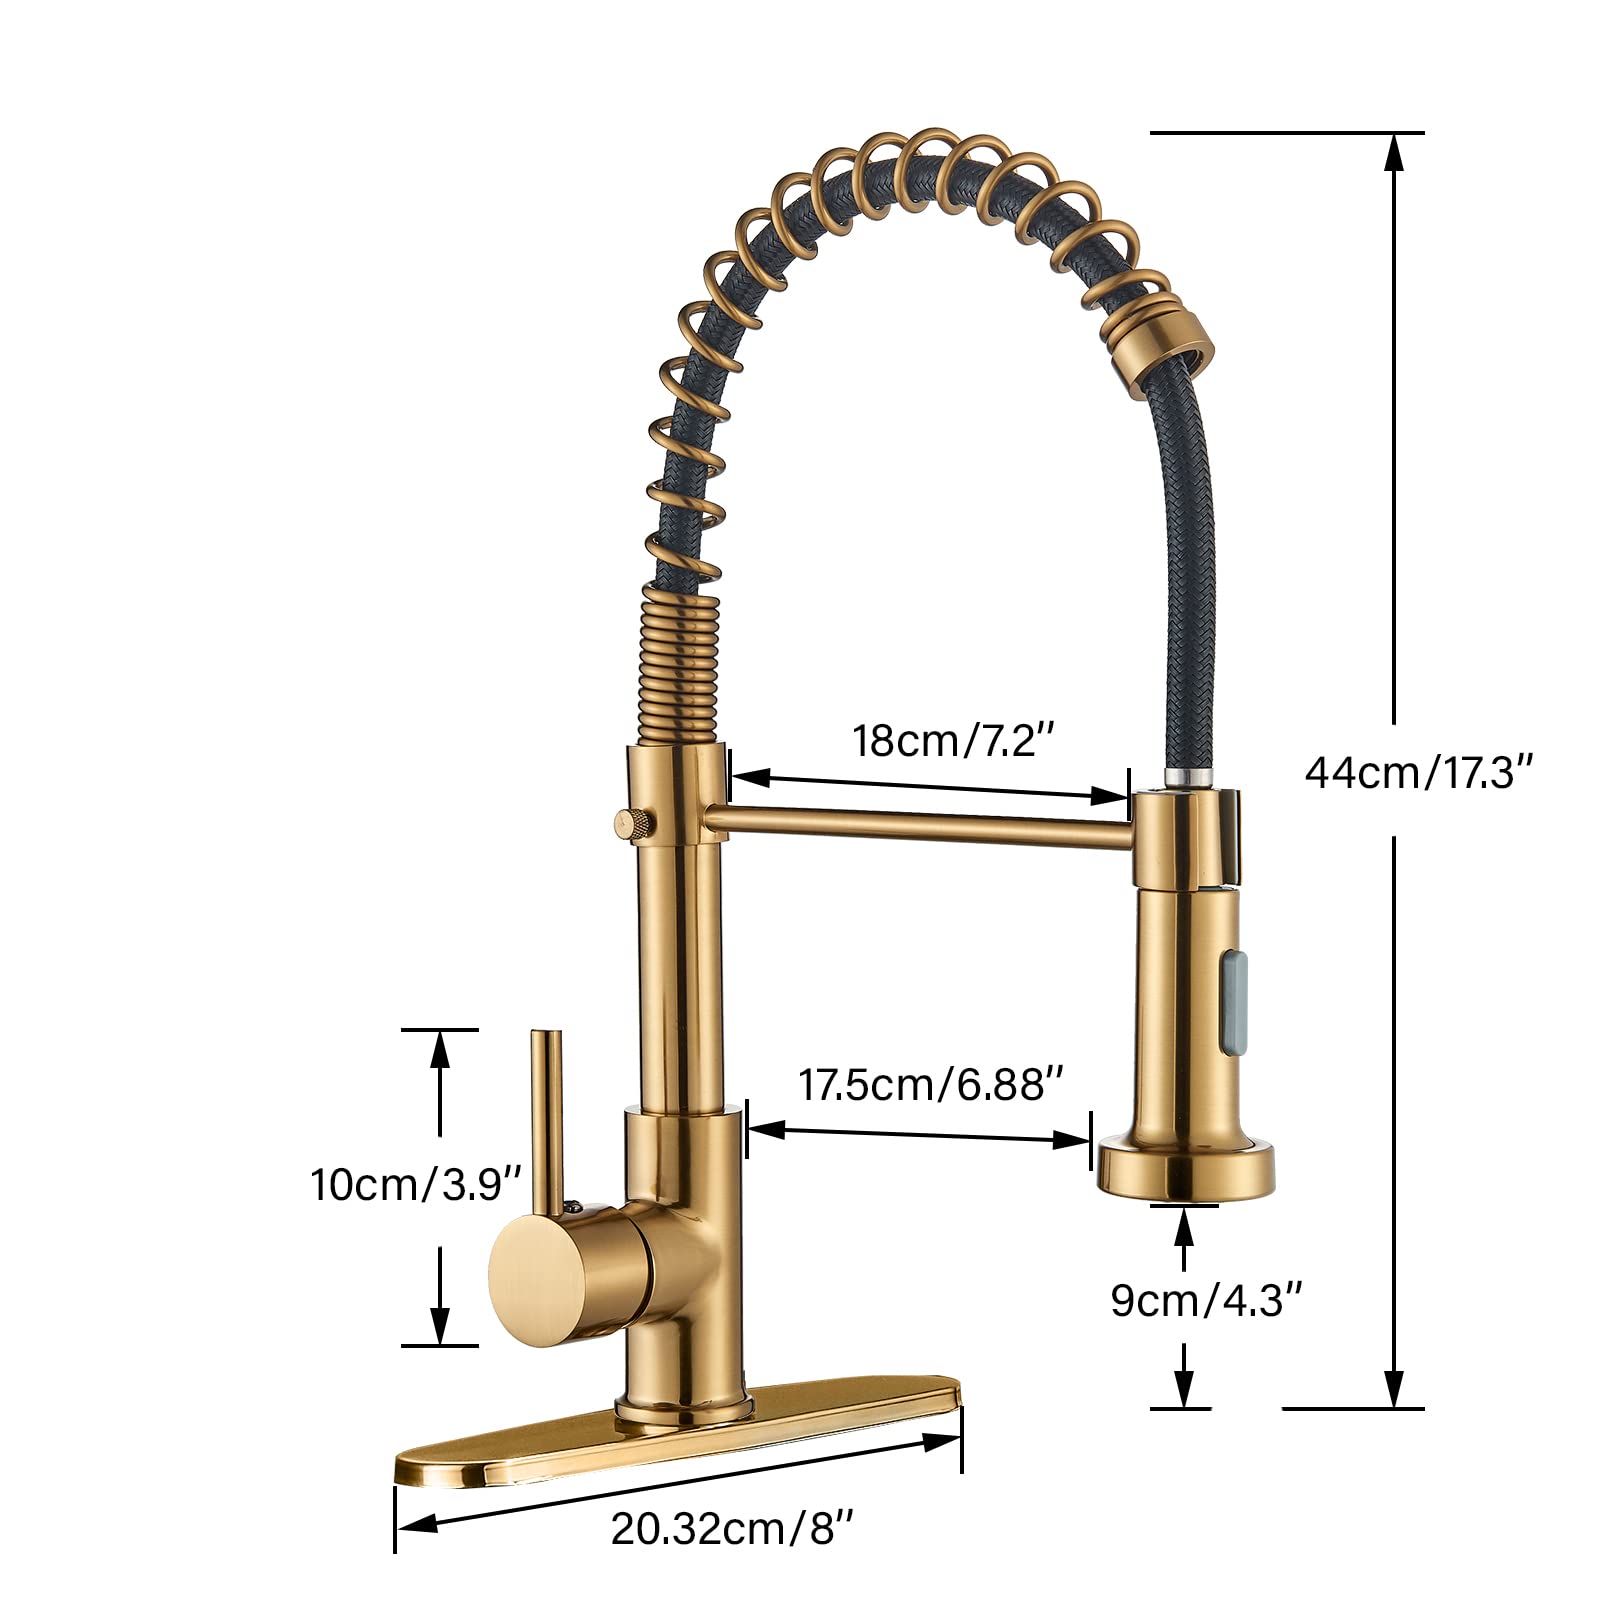 DanPiang Gold Kitchen Faucet,Commercial Stainless Steel Single Handle Pull Down Kitchen Sink Faucet with Deck Plate,Brushed Gold